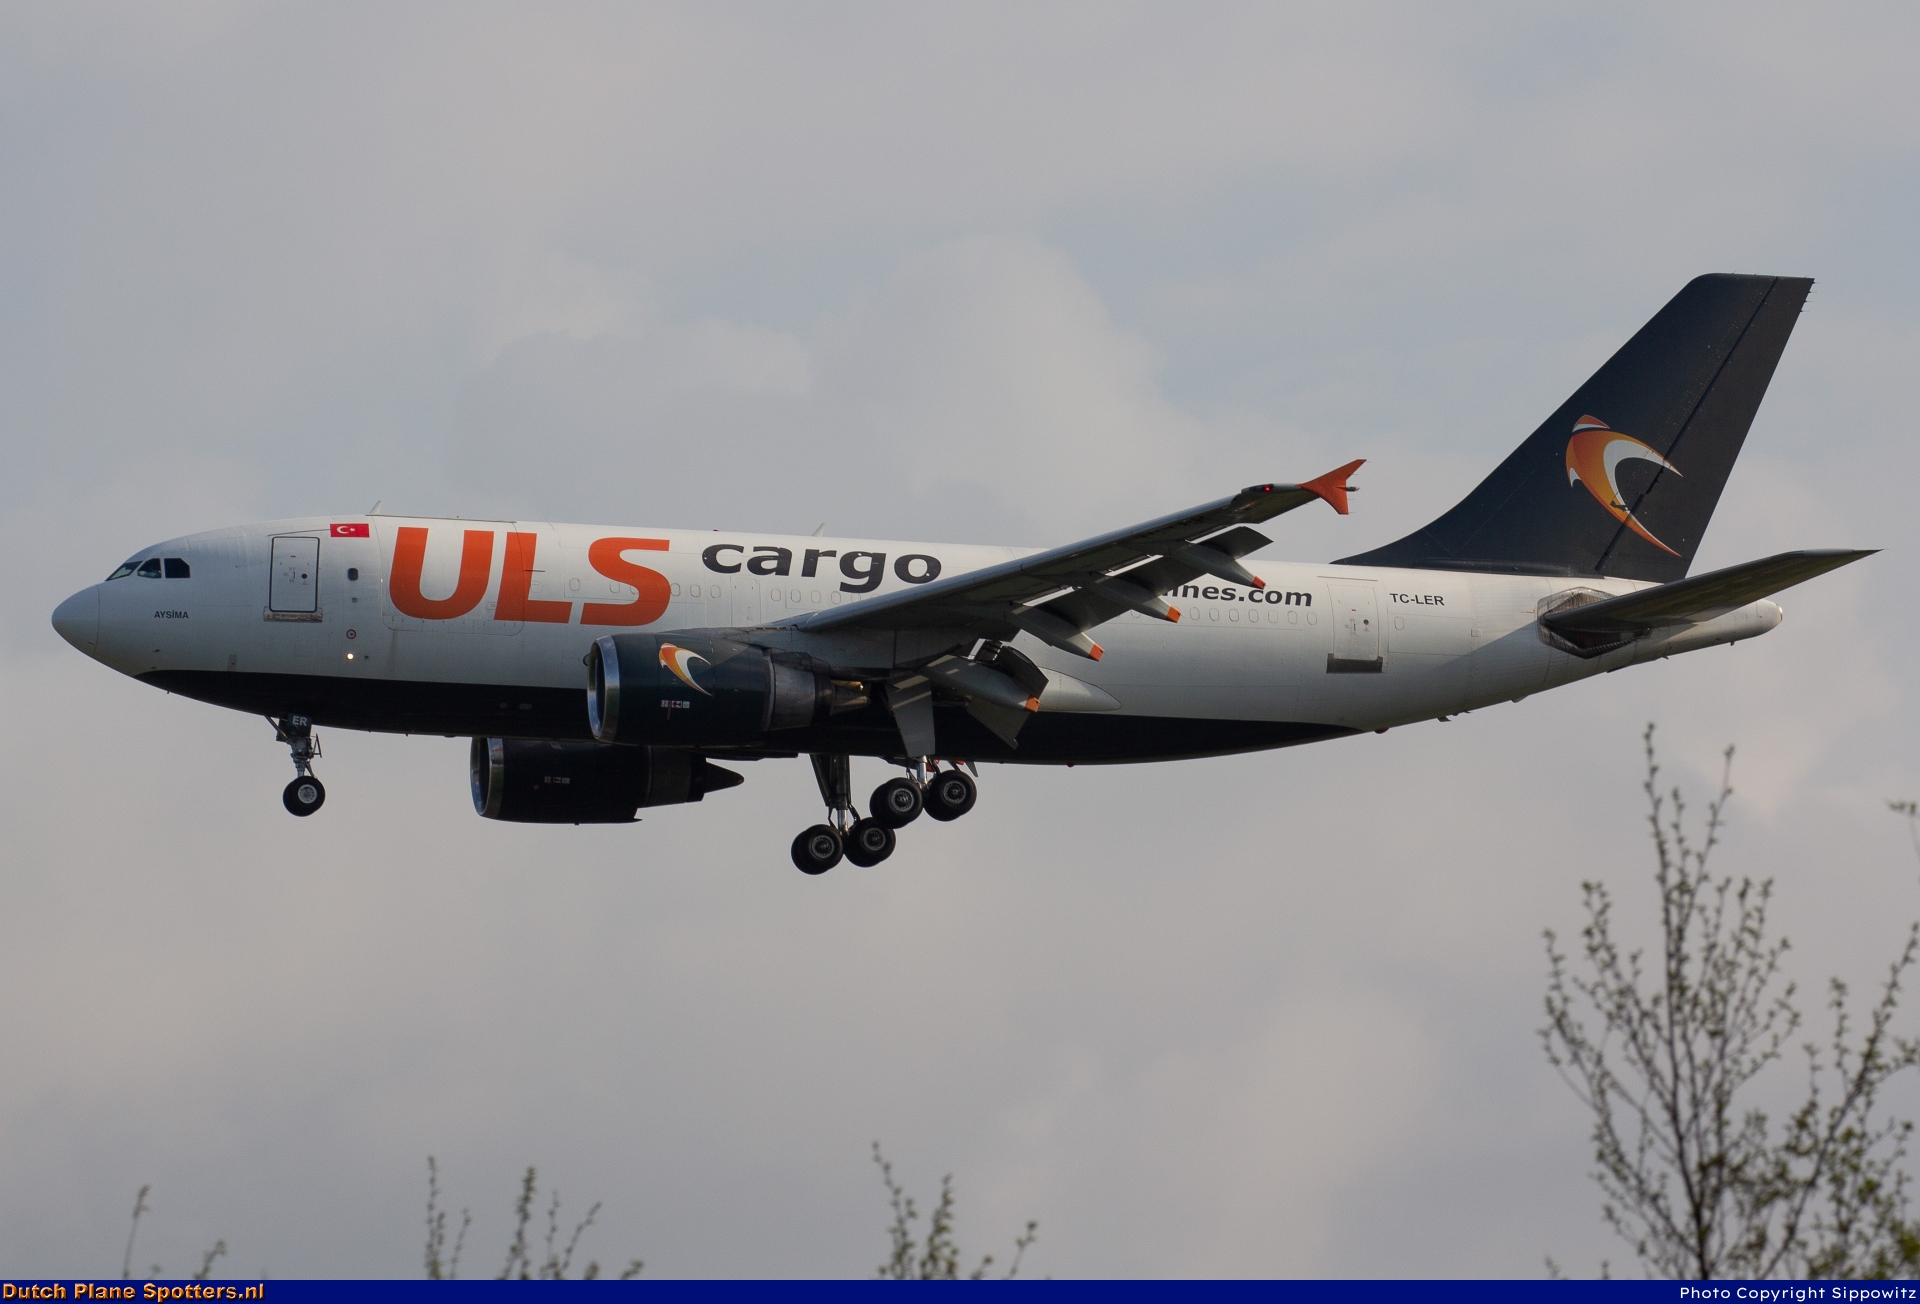 TC-LER Airbus A310 ULS Air Cargo by Sippowitz